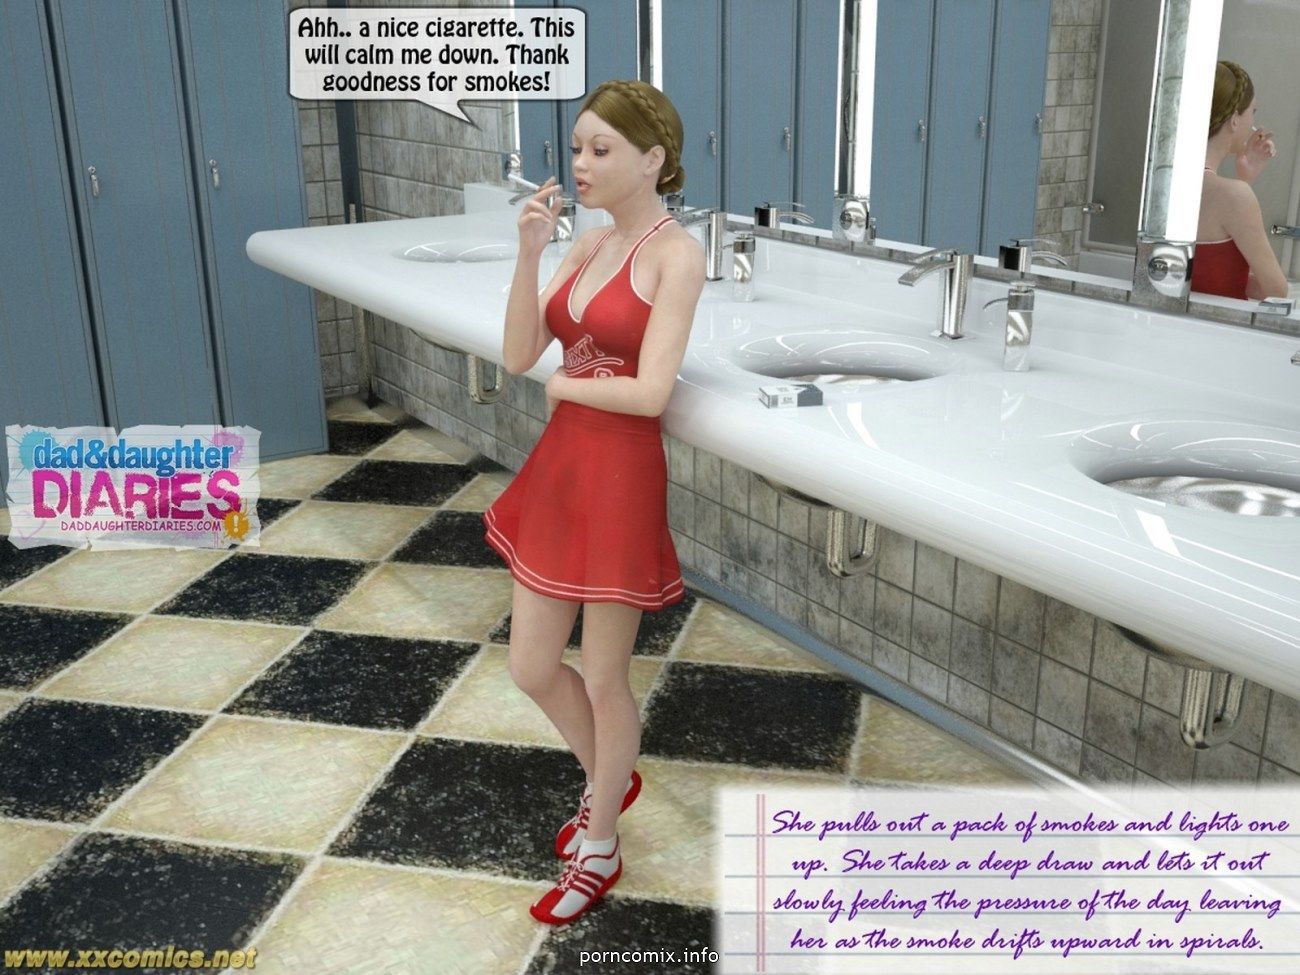 Daddy + Daughter 10 Diaries, 3D Incest page 4